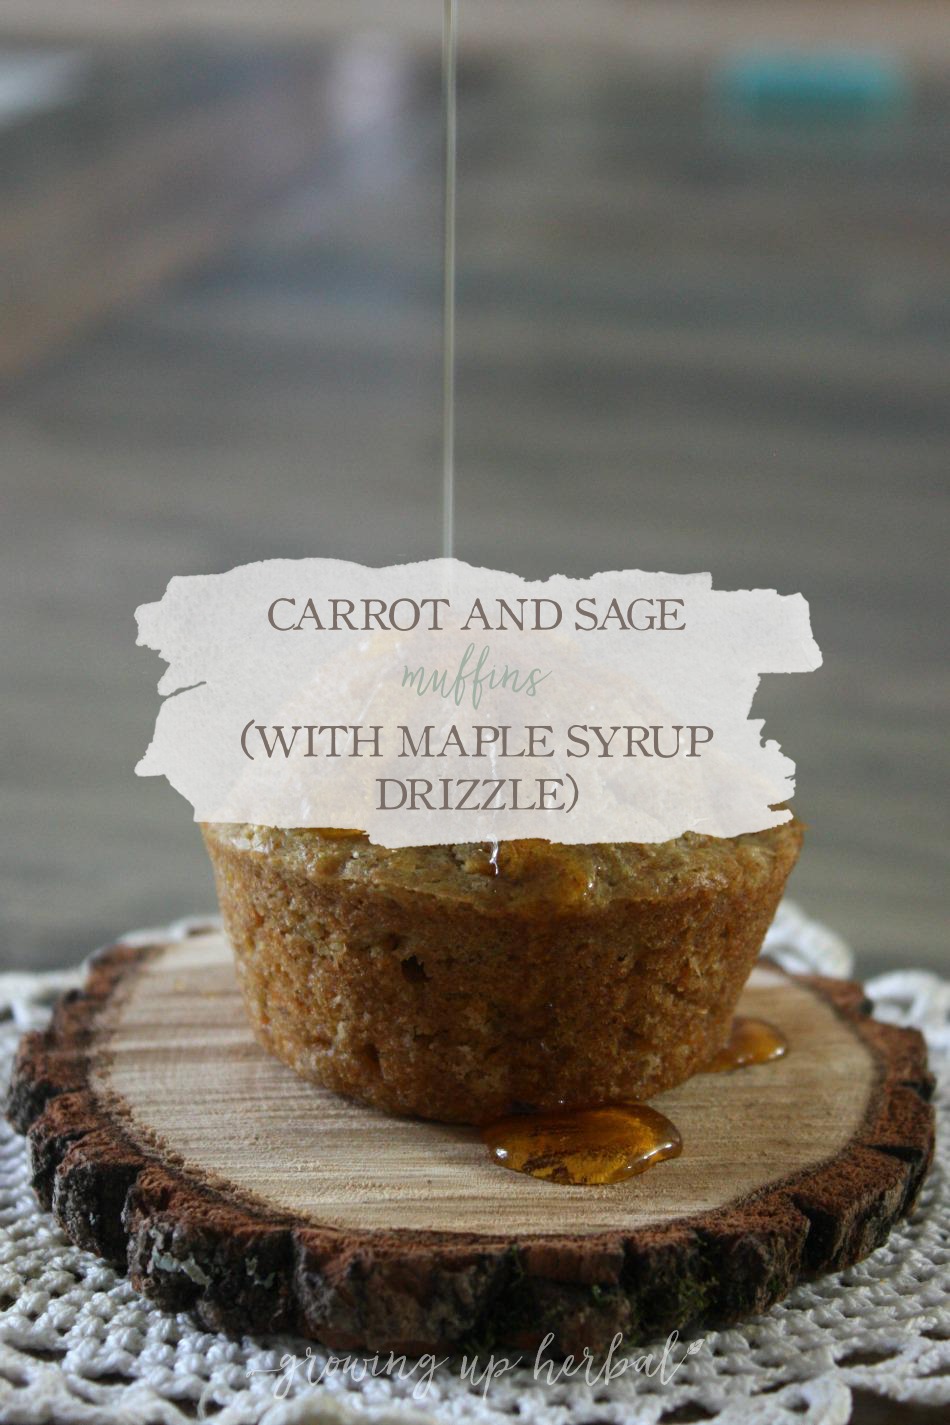 Carrot And Sage Muffins (With Maple Syrup Drizzle) | Growing Up Herbal | These sweet and savory muffins are a great start to your day when paired with some homemade yogurt and raw milk! Yum!